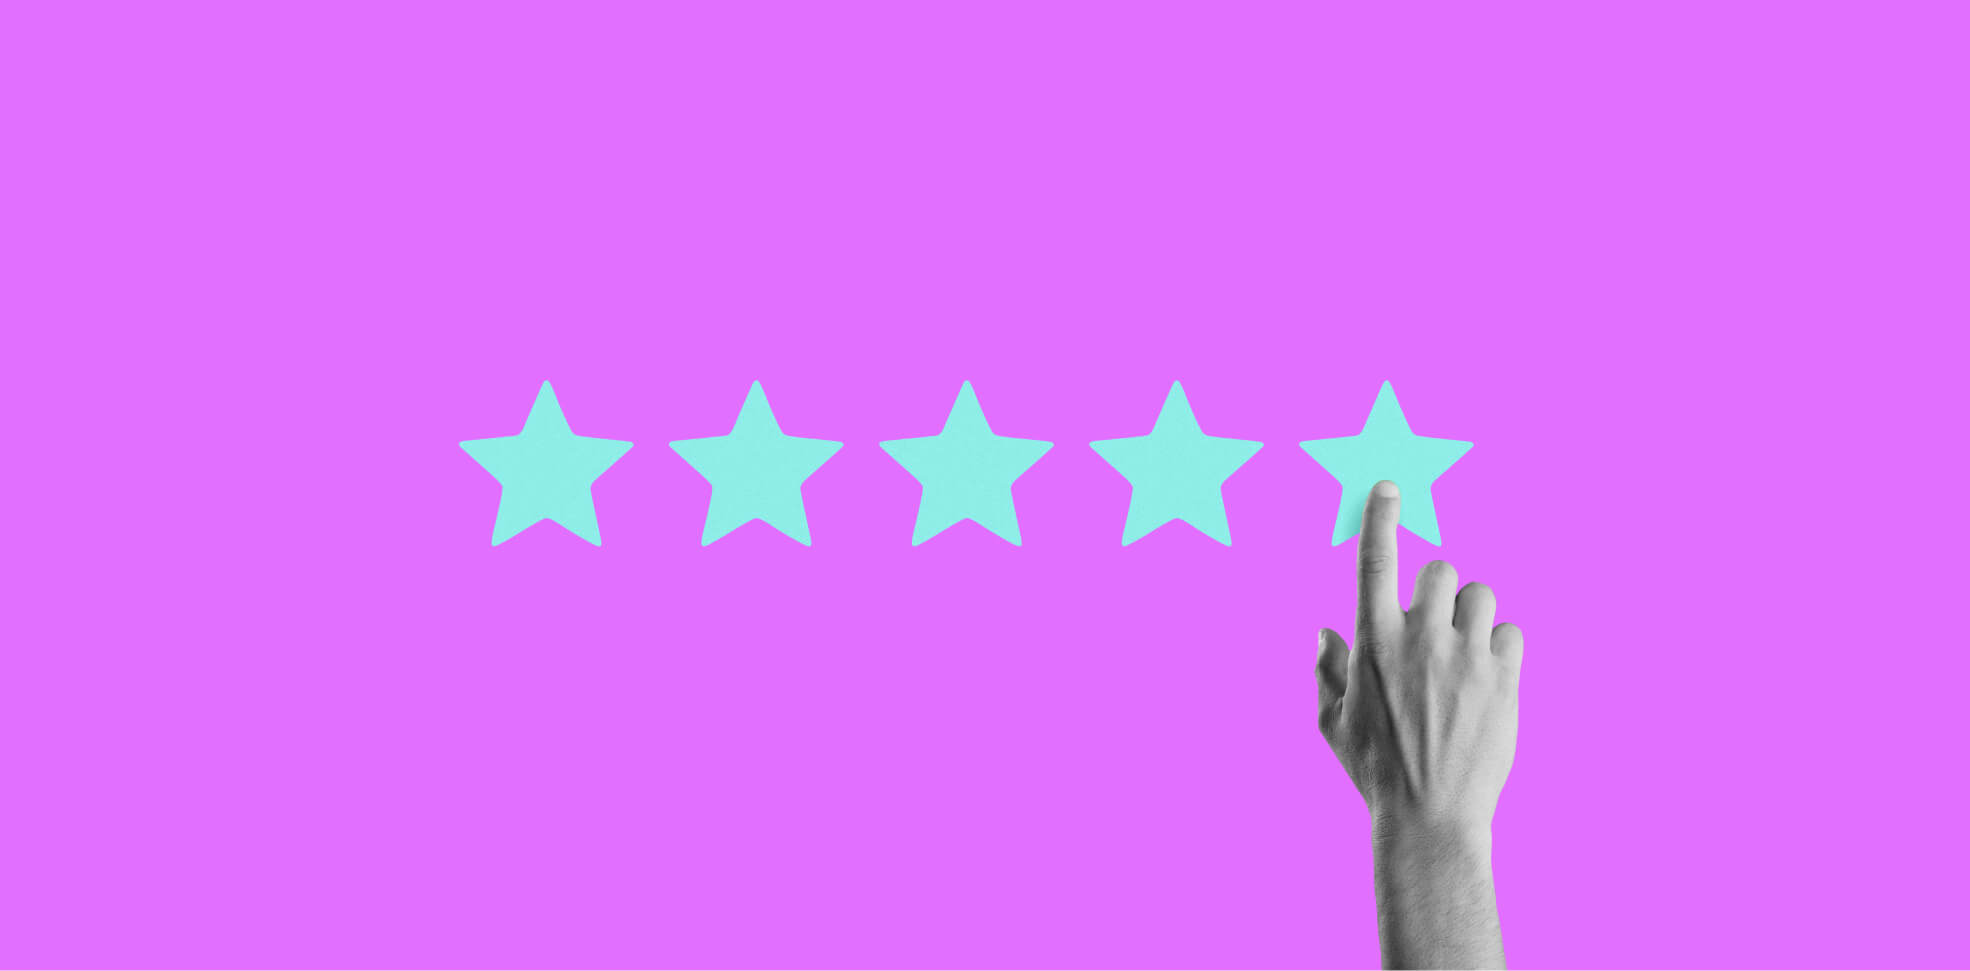 5 stars and a hand on purple background